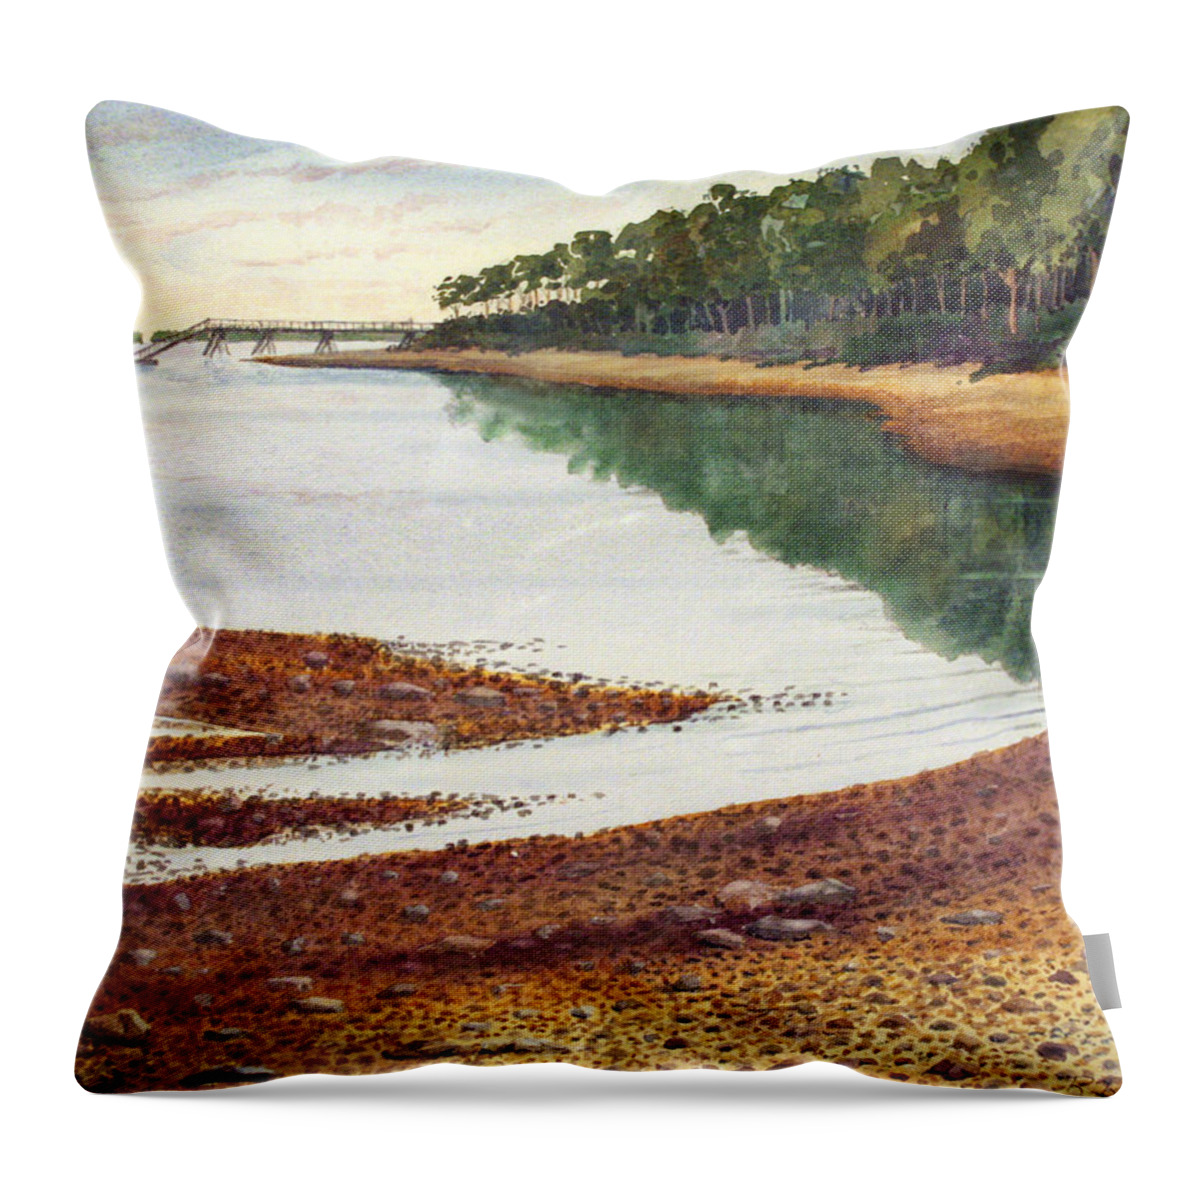 Landscape Throw Pillow featuring the painting Penobscot Bay by Roger Rockefeller